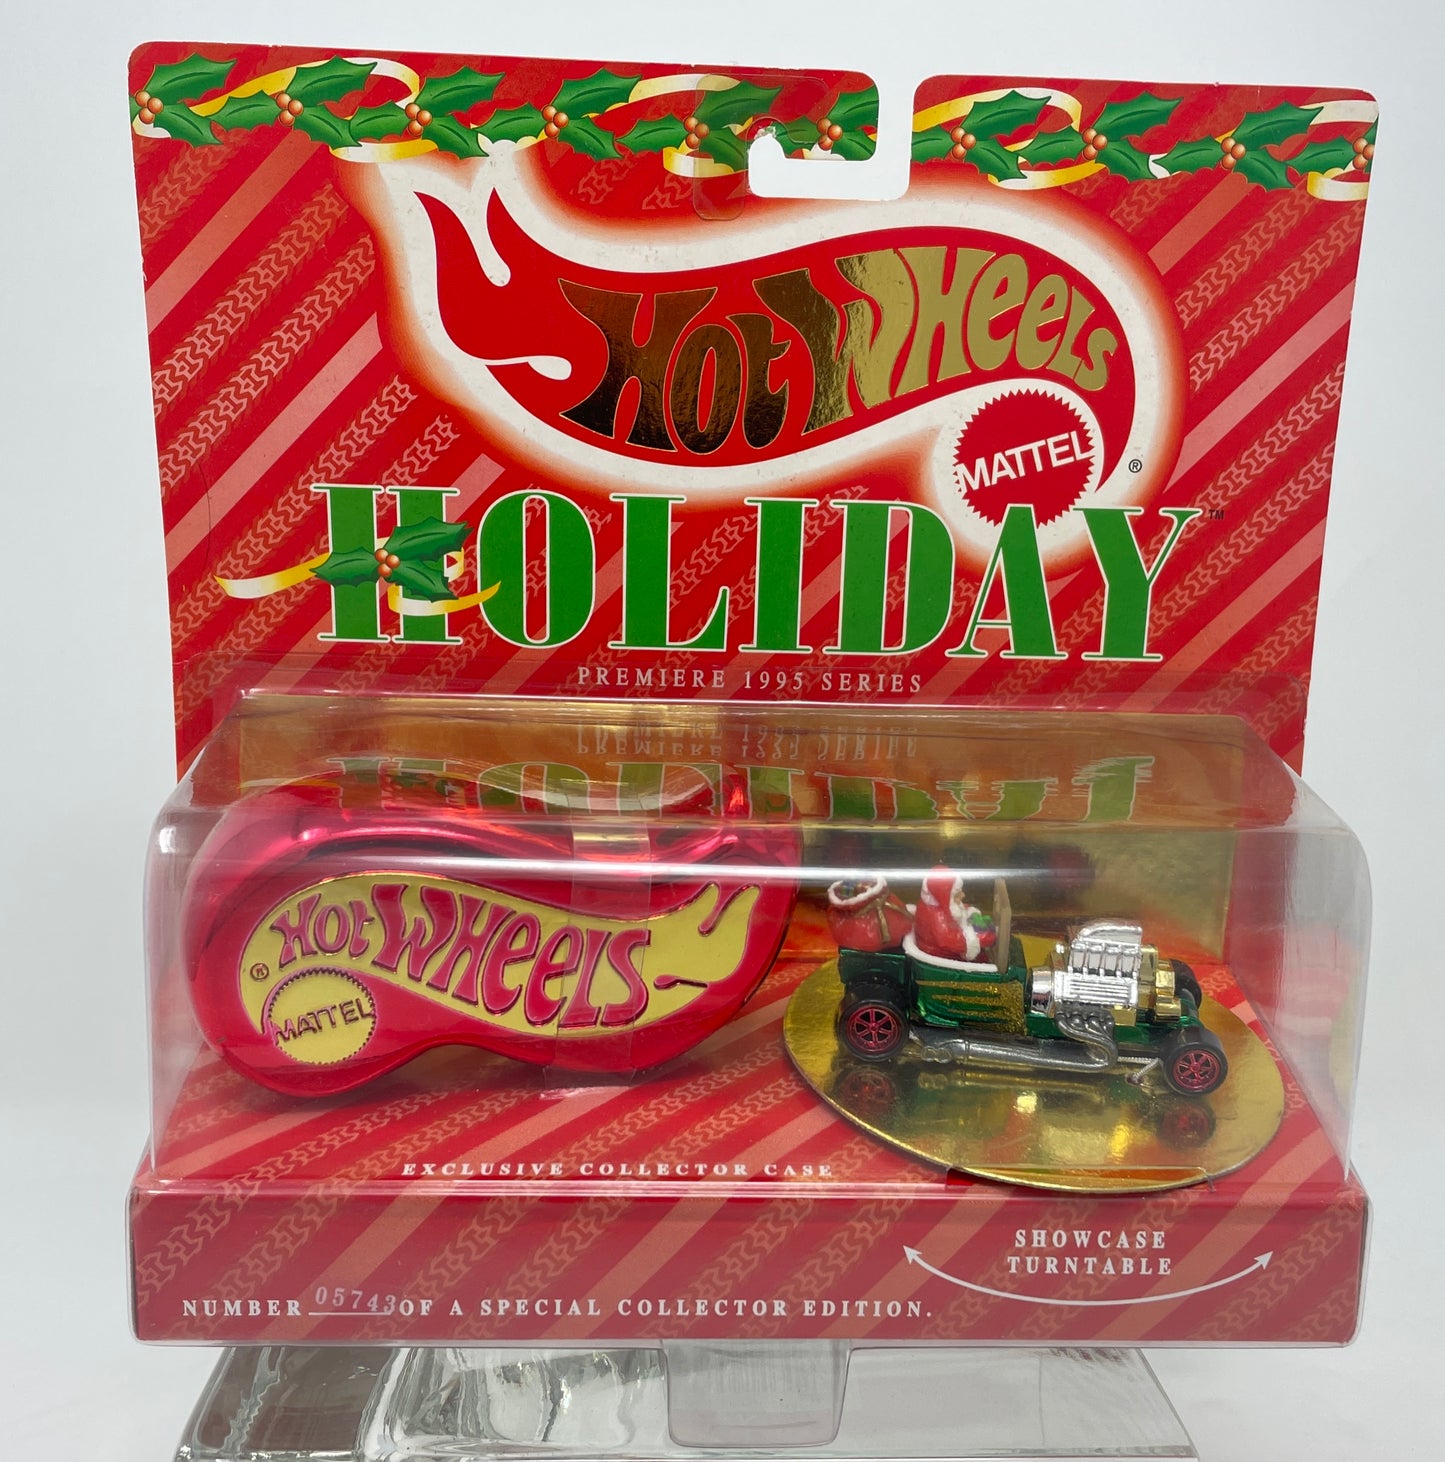 HOT WHEELS HOLIDAY GREEN T-BUCKET - RED LOGO CASE - PREMIERE 1995 SERIES - NUMBERED SPECIAL COLLECTOR EDITION - MATTEL